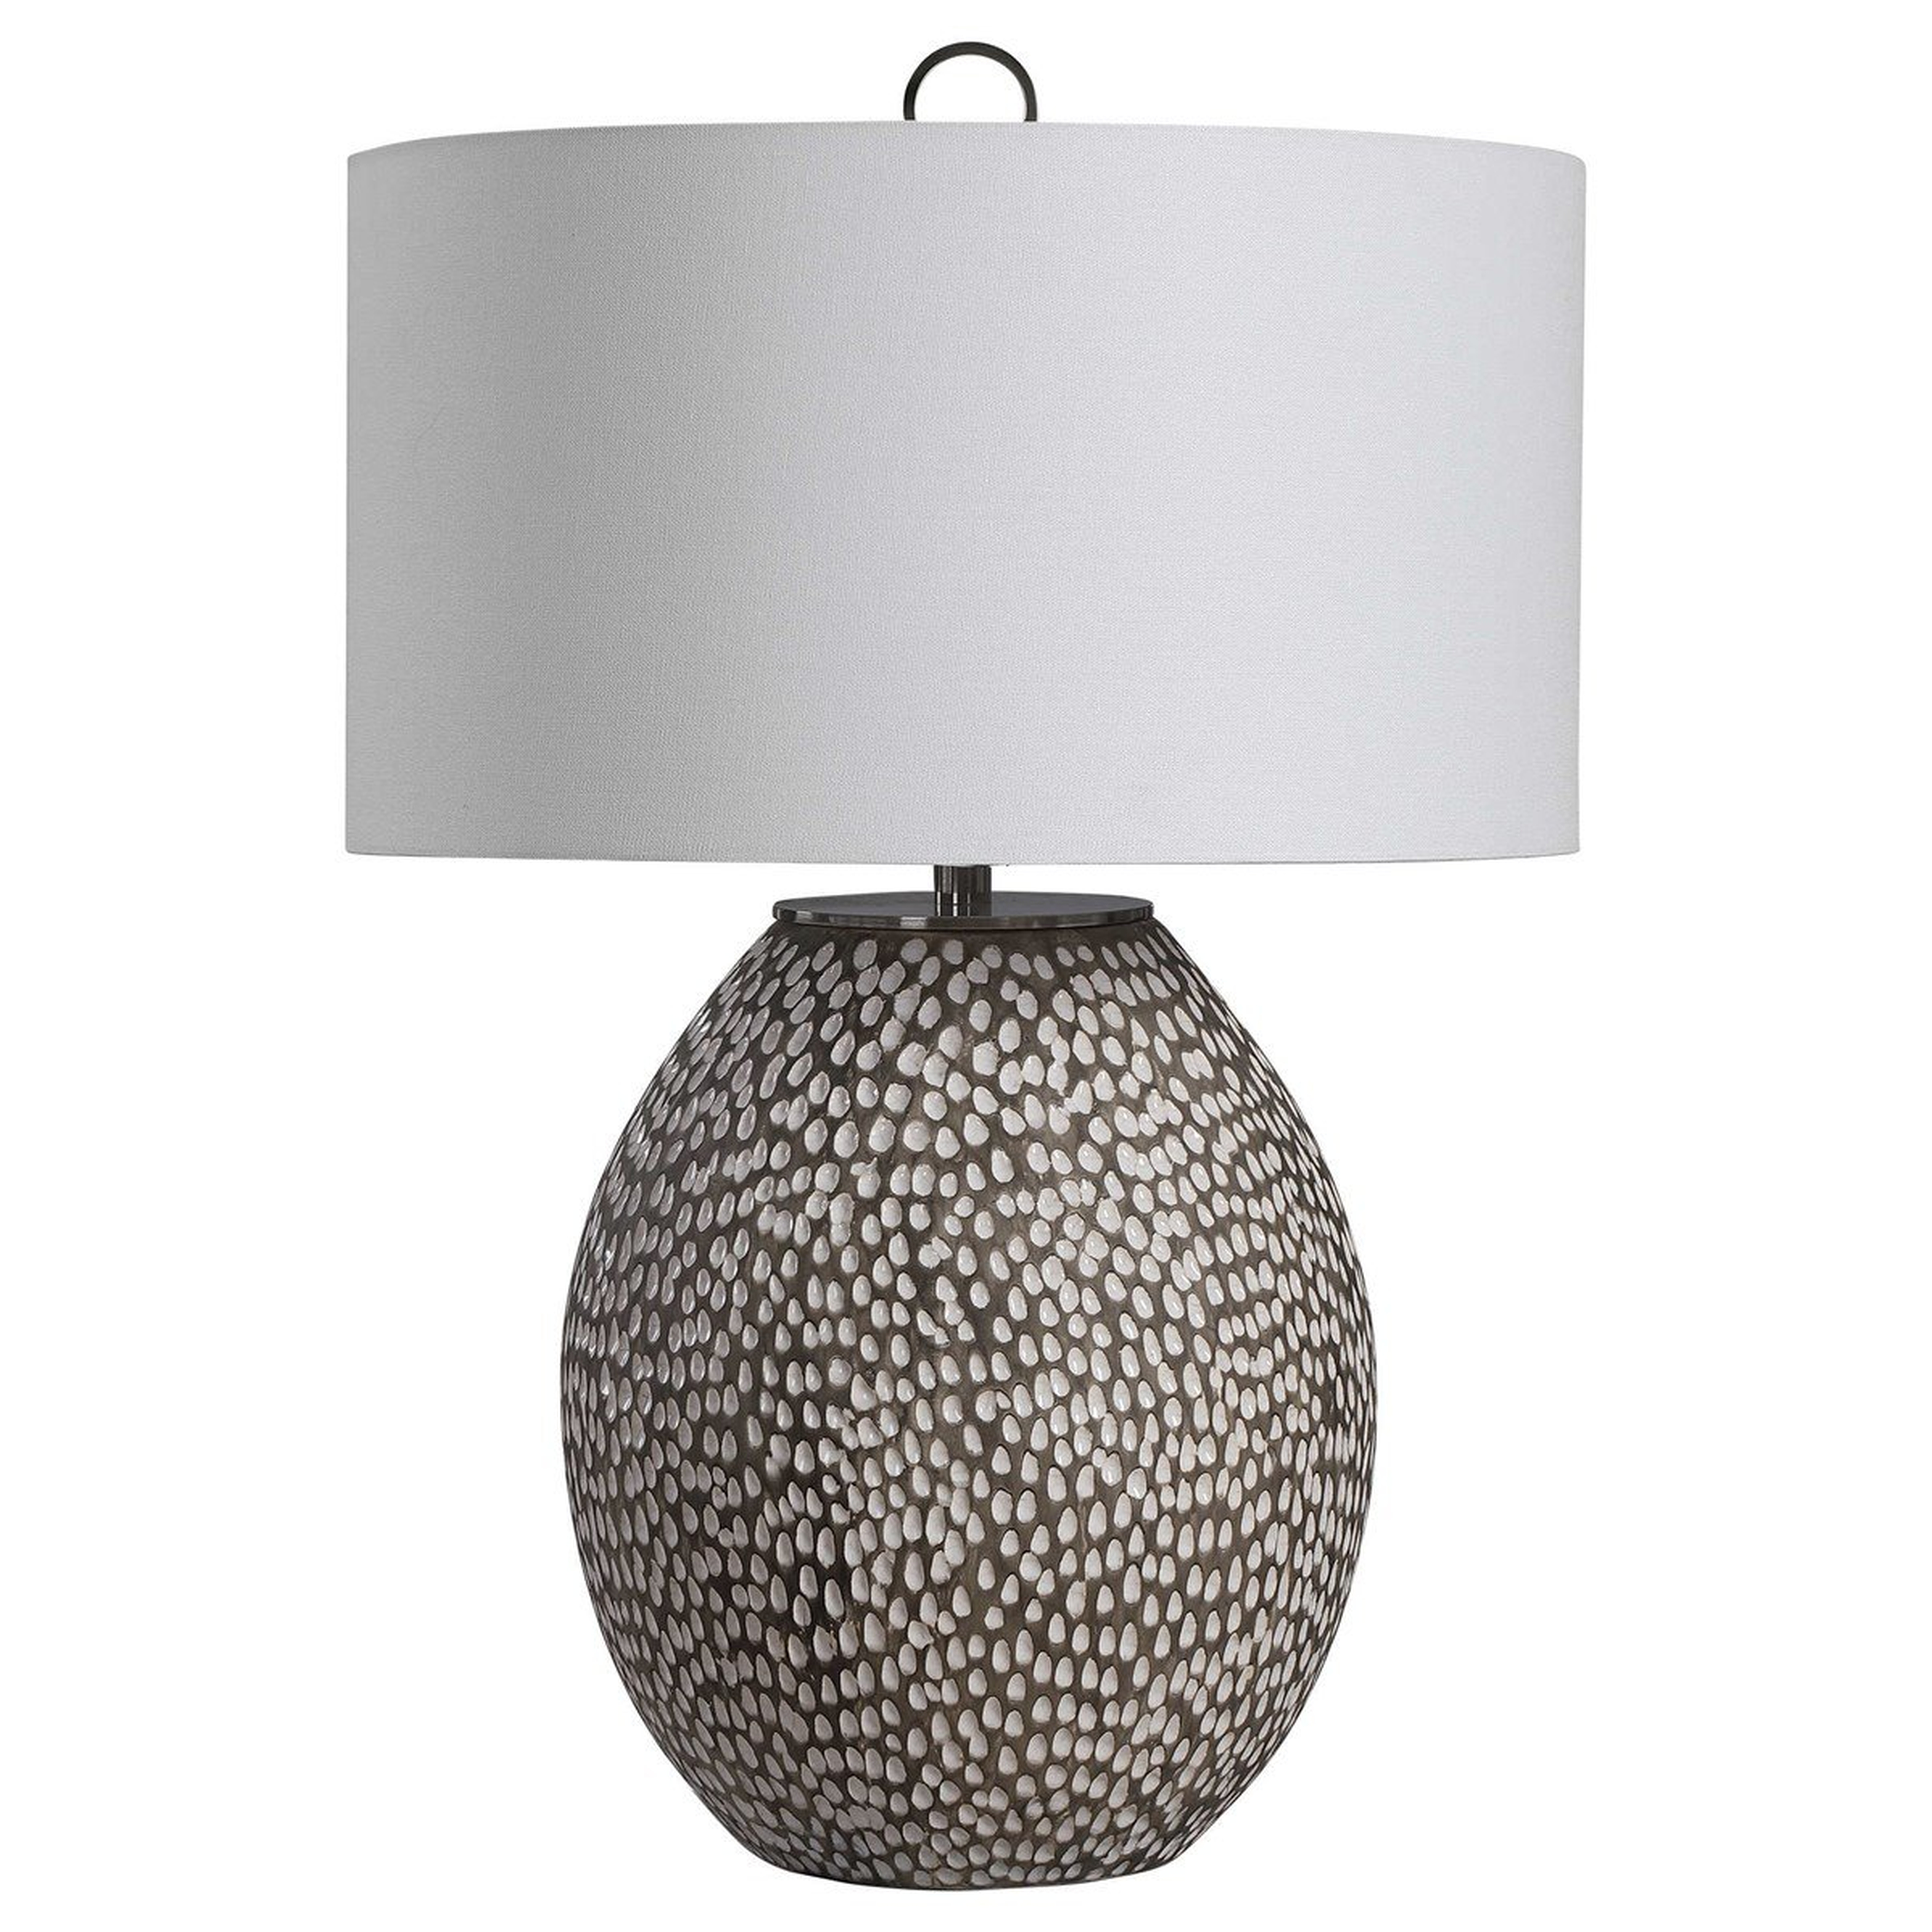 CYPRIEN TABLE LAMP - Hudsonhill Foundry